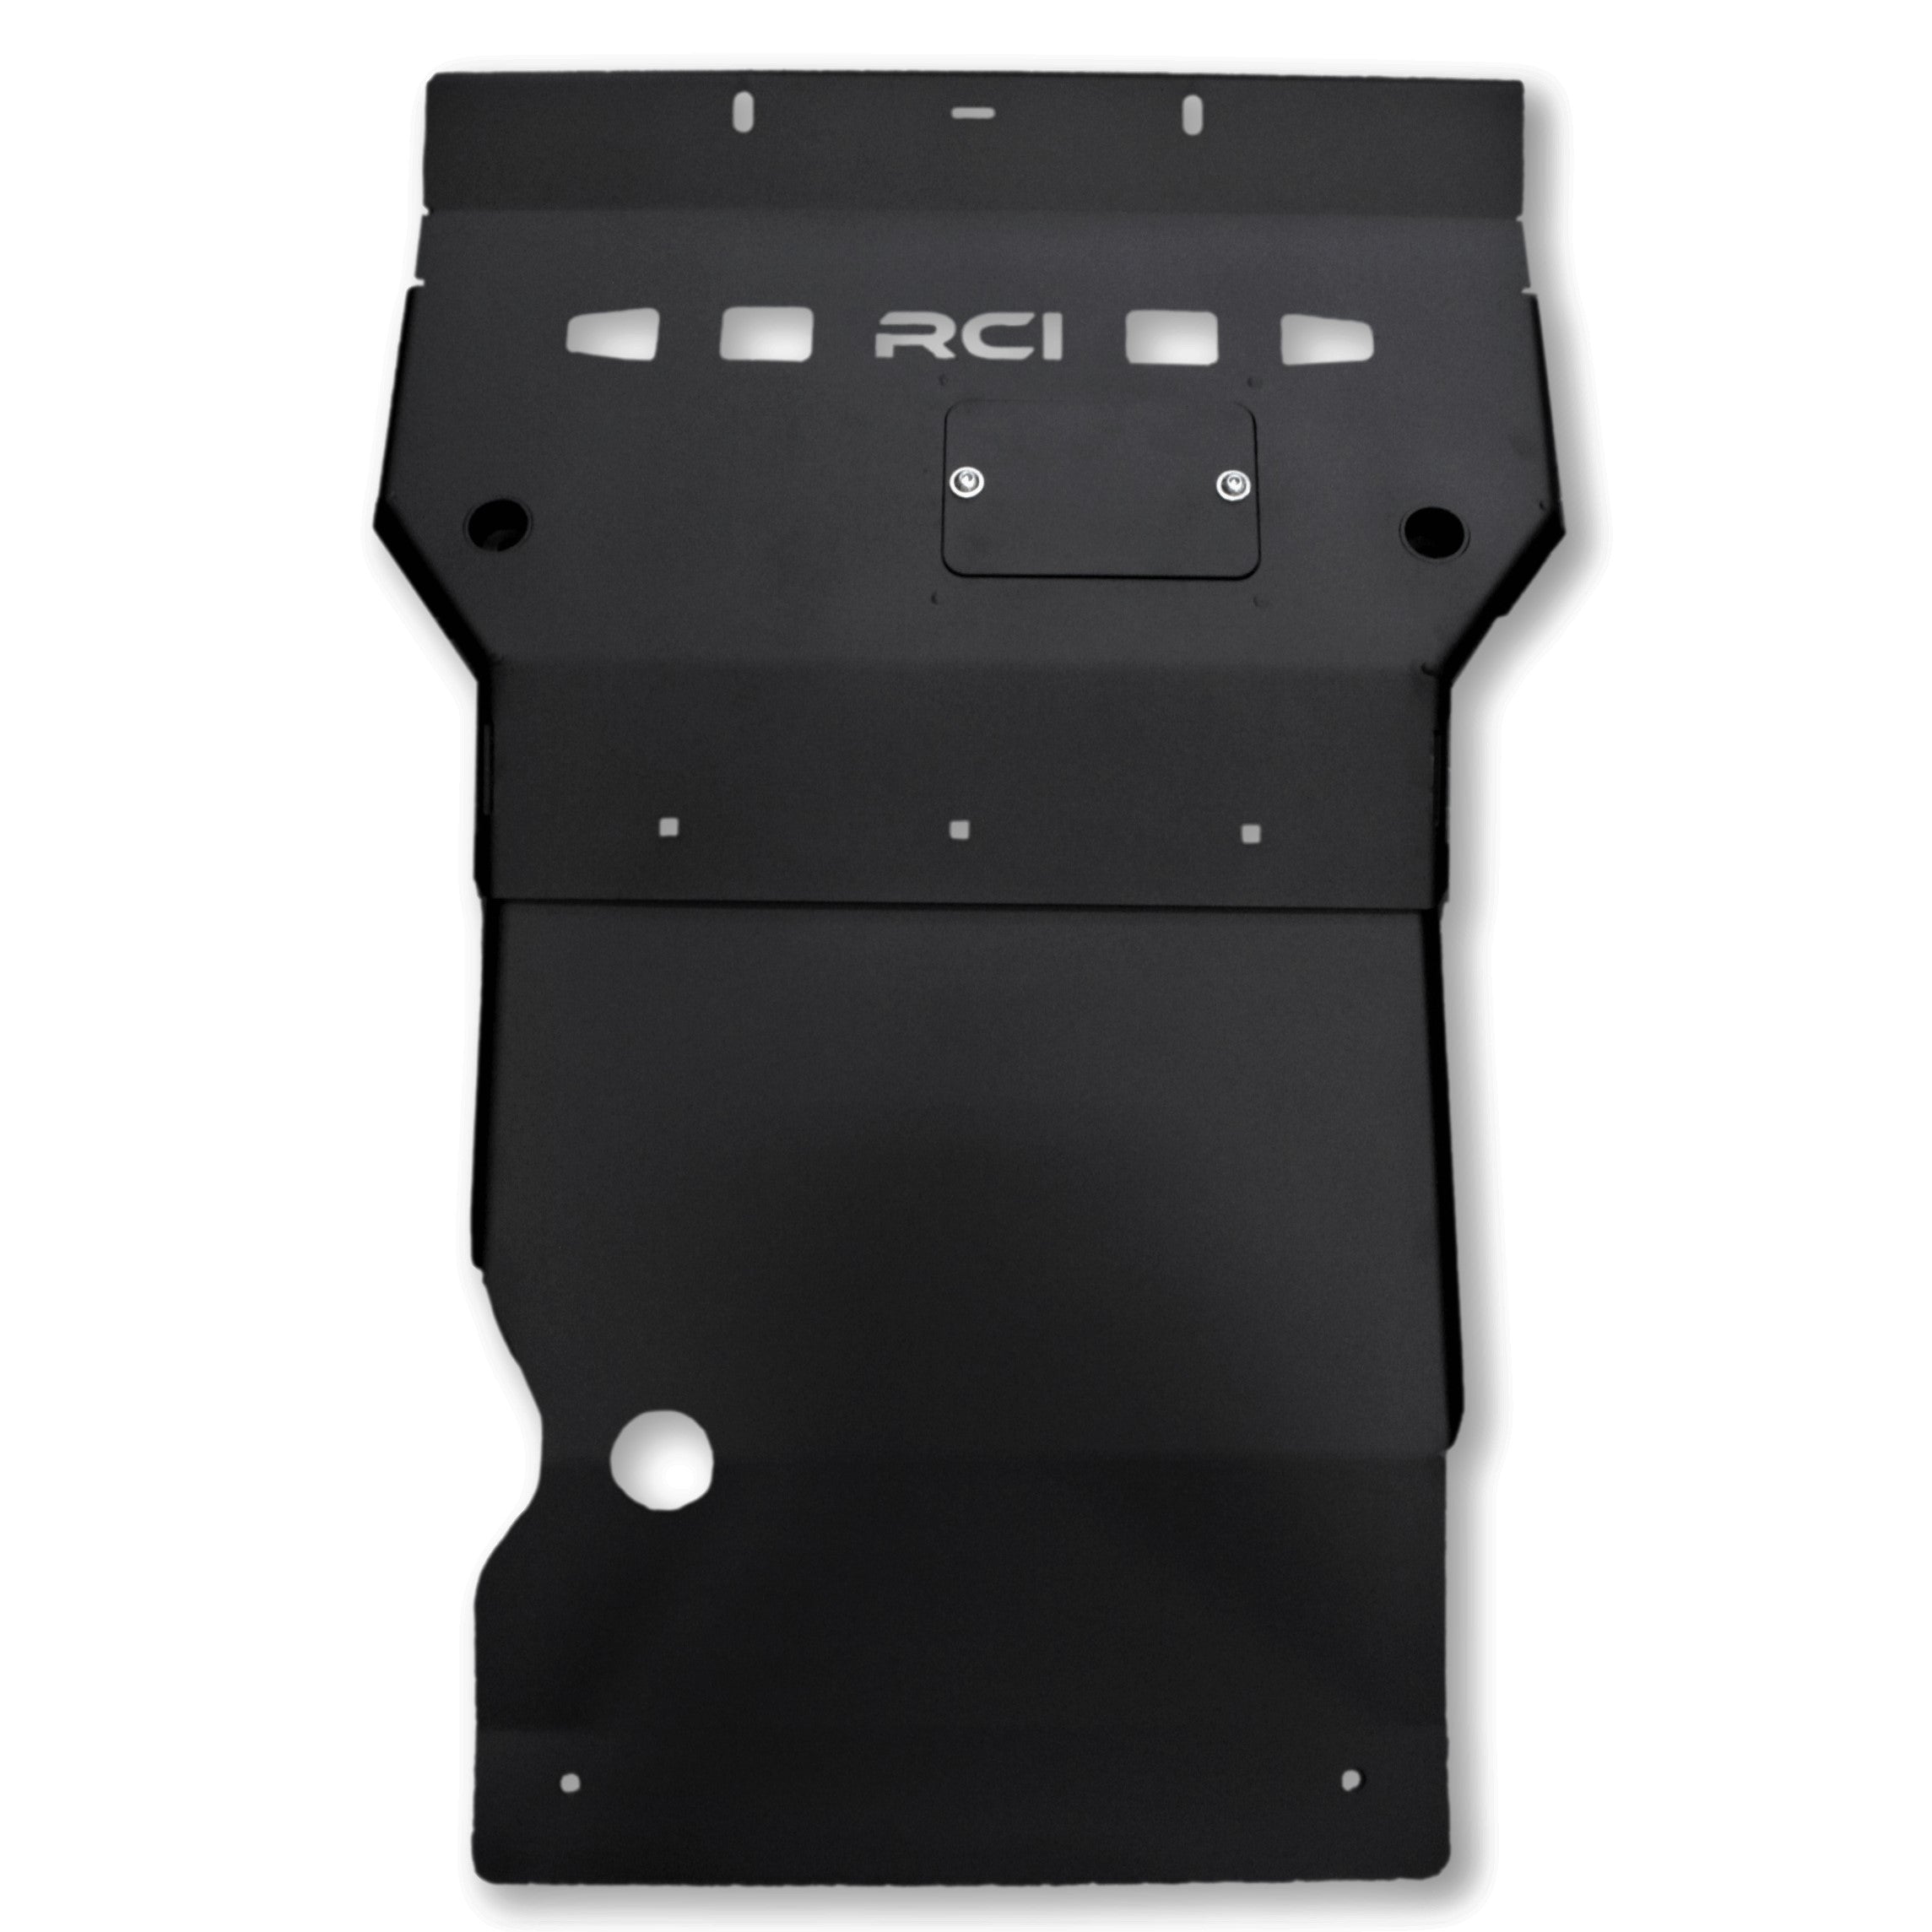 '22-23 Toyota Tundra RCI Off-Road Skid Plate Package (top view)